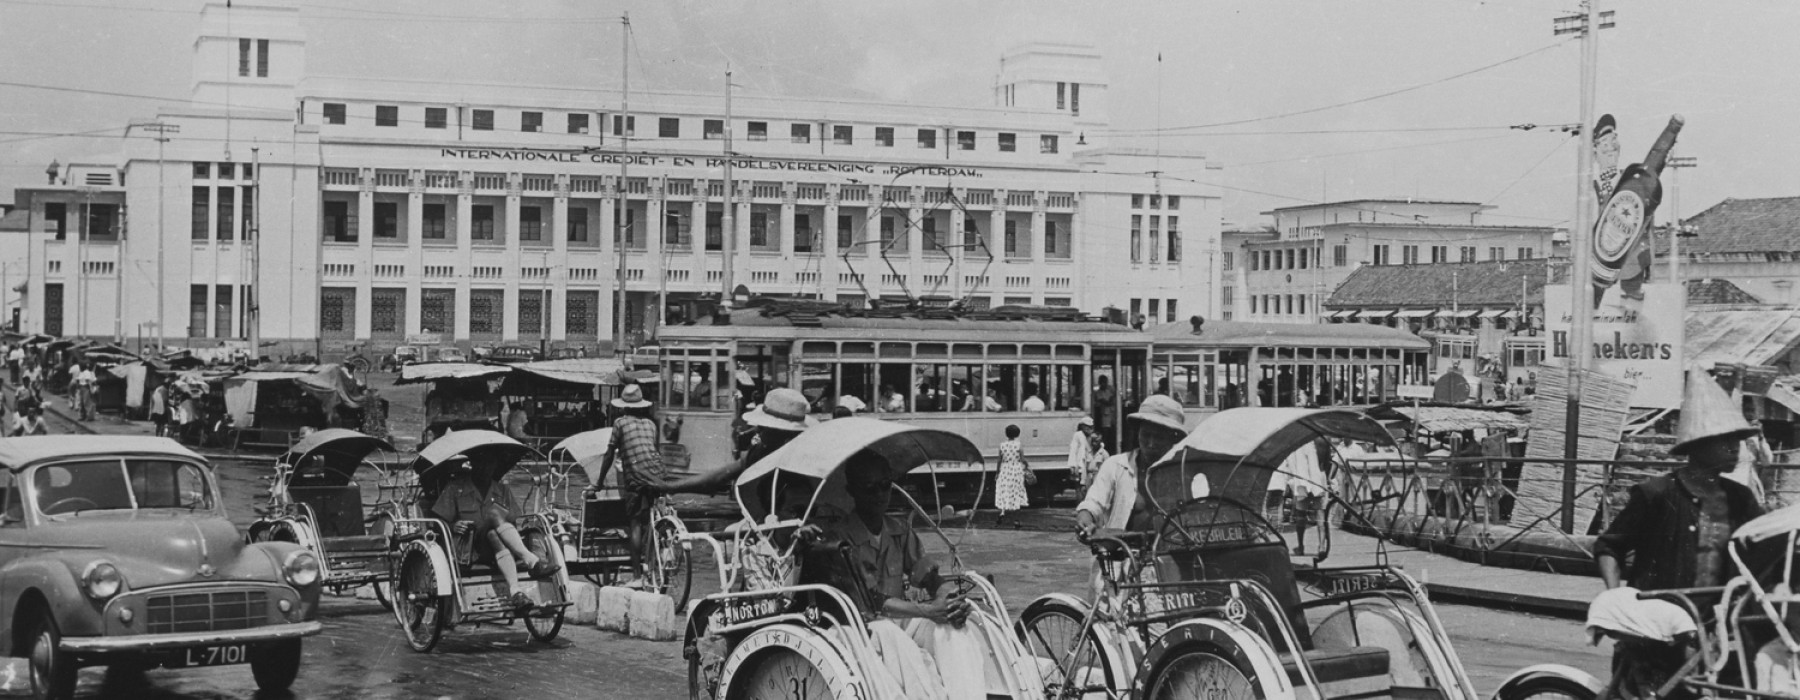 Bicycle taxis, cars and a tram at the intersection in front of the office of the International Credit and Trade Association "Rotterdam". Surabaya, between 1953 and 1960. Photo: NMVW Collection